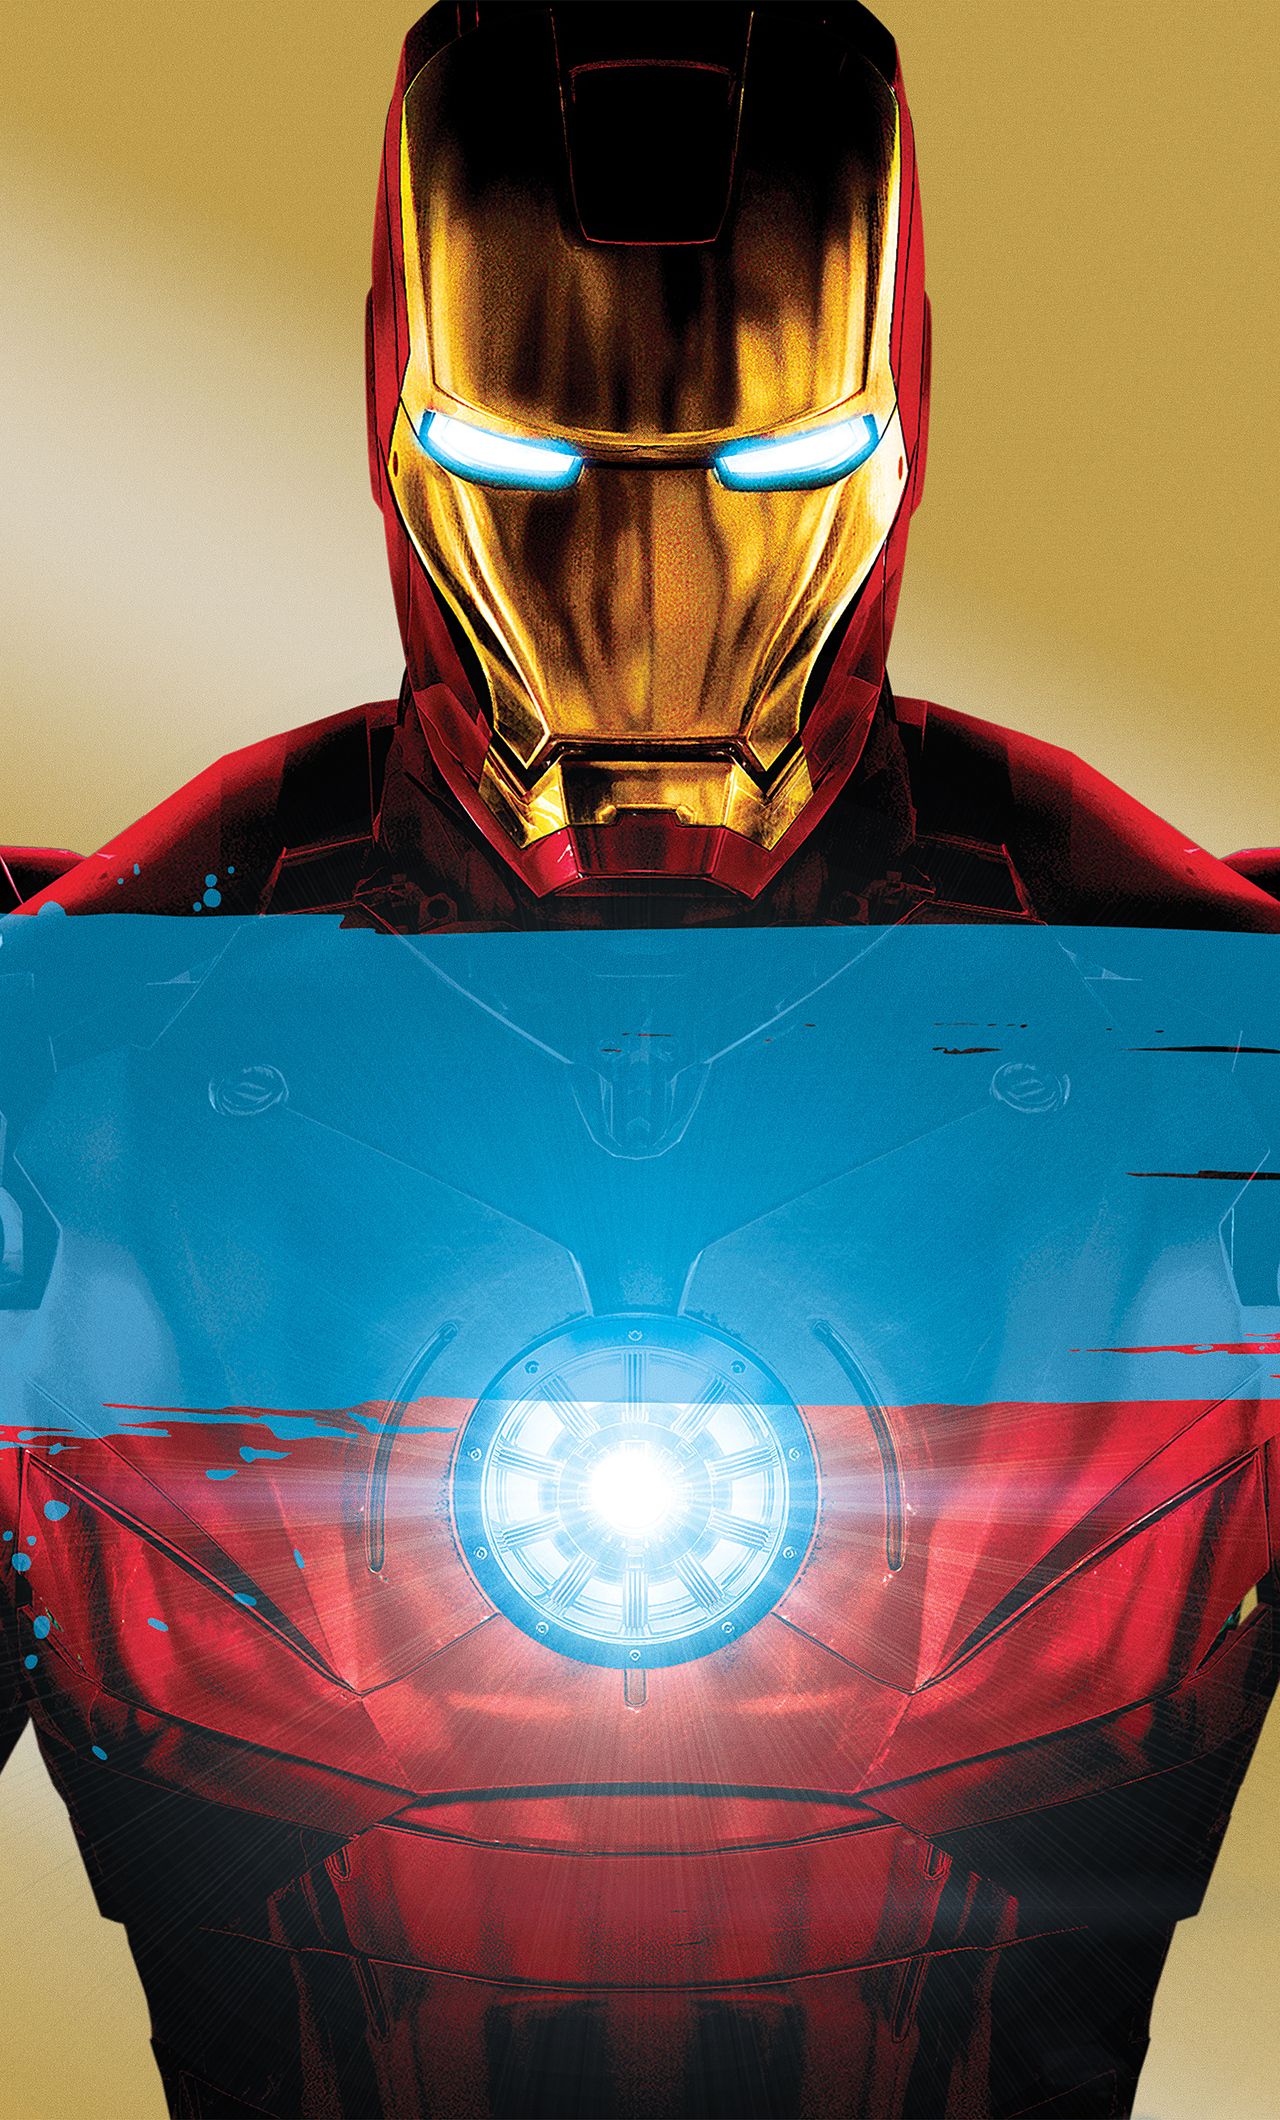 Iron Man Superhero 4k iPhone HD 4k Wallpaper, Image, Background, Photo and Picture